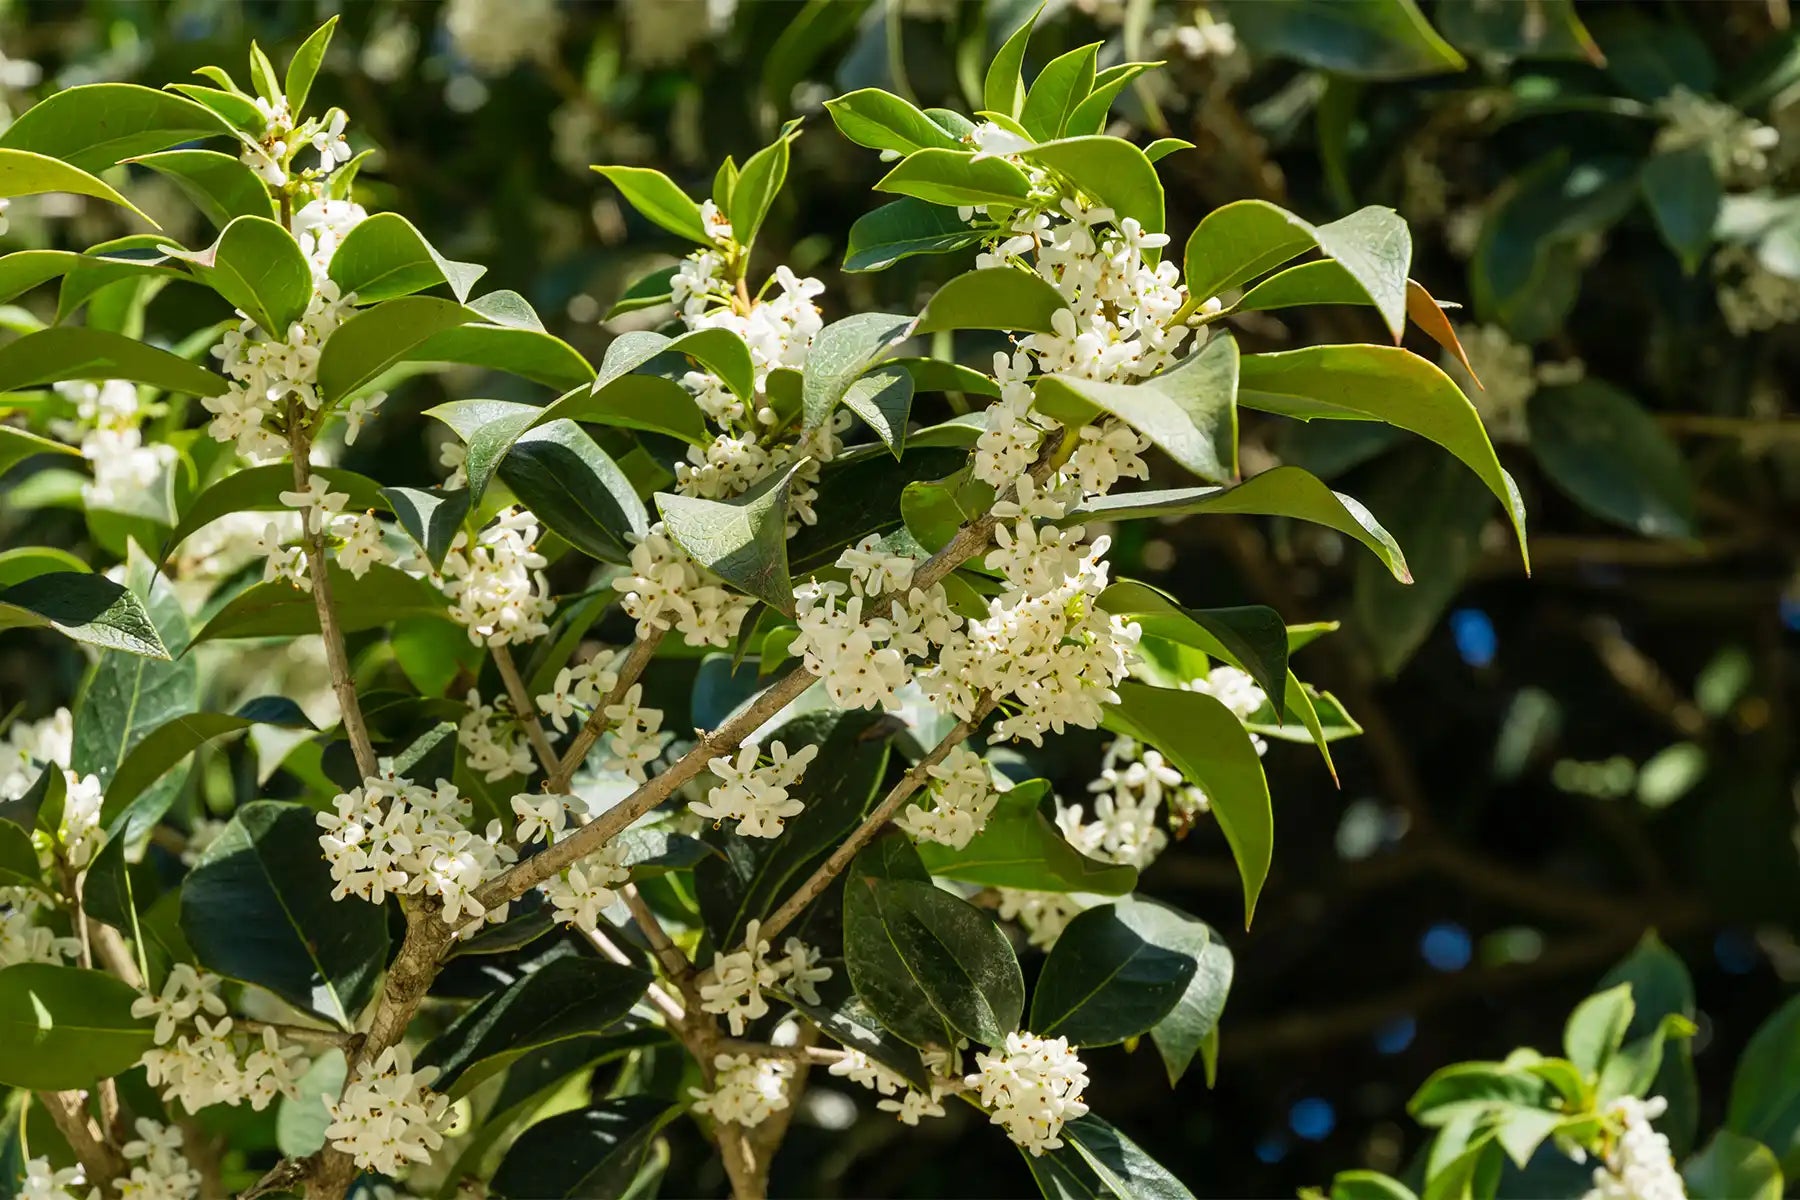 Osmanthus Fragrans, the Fragrant Tea Olive has populated each stem with many creamy white, miniature blossoms per cluster. Although we cannnot see its captivating fragrance, it was definiely there when this photo was taken of it in fill bloom